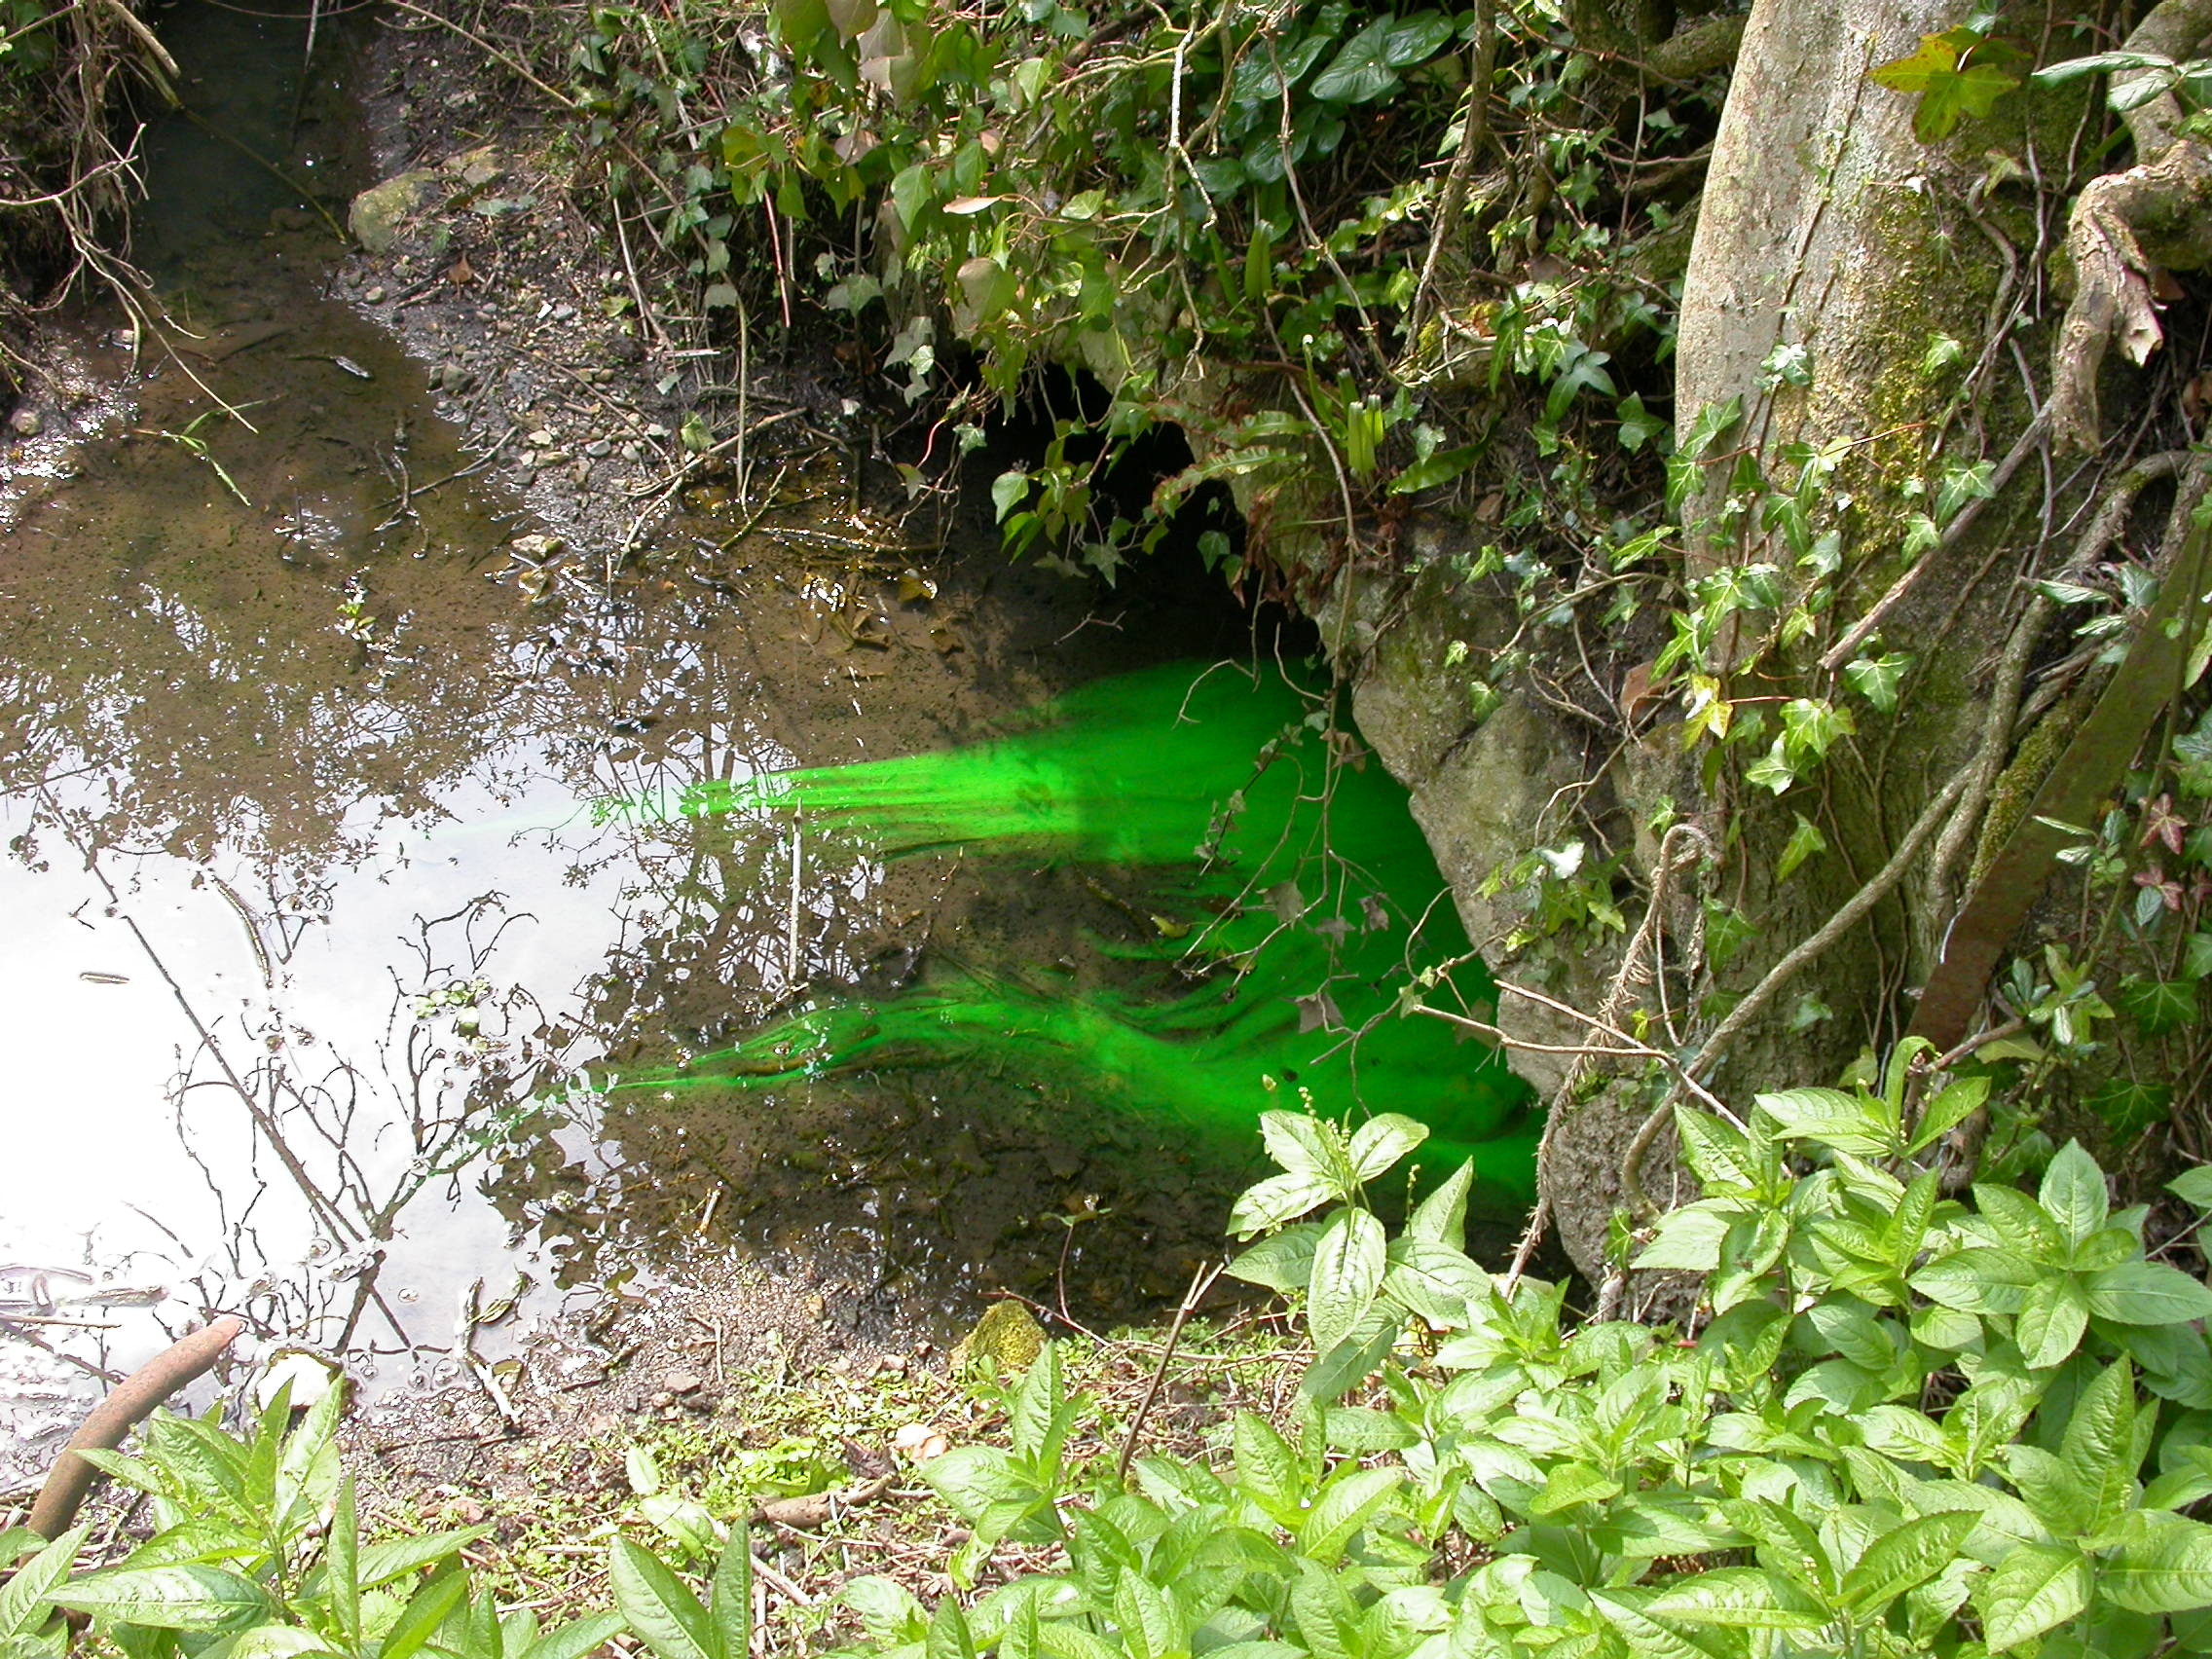 Evidence of dye from a private drainage system